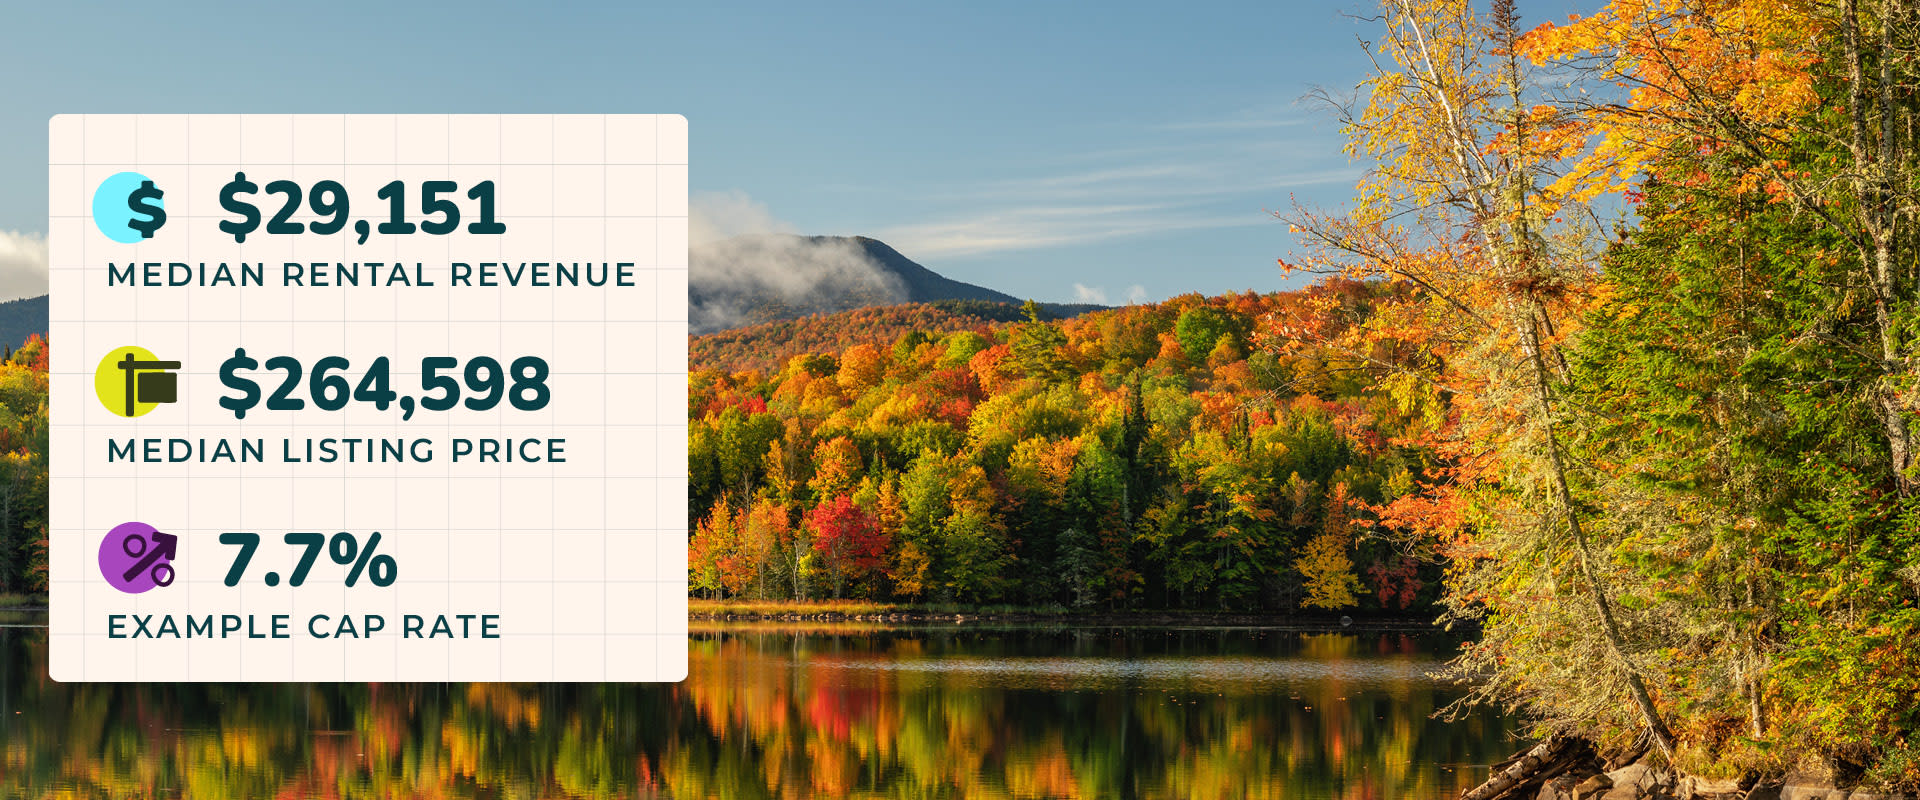 Photo of colorful fall foliage over reflective water near Saranac Lake, NY, one of the best places to buy a lake house. Image text reads, "$29,151 median rental revenue. $264,598 median listing price. 7.7% example cap rate."